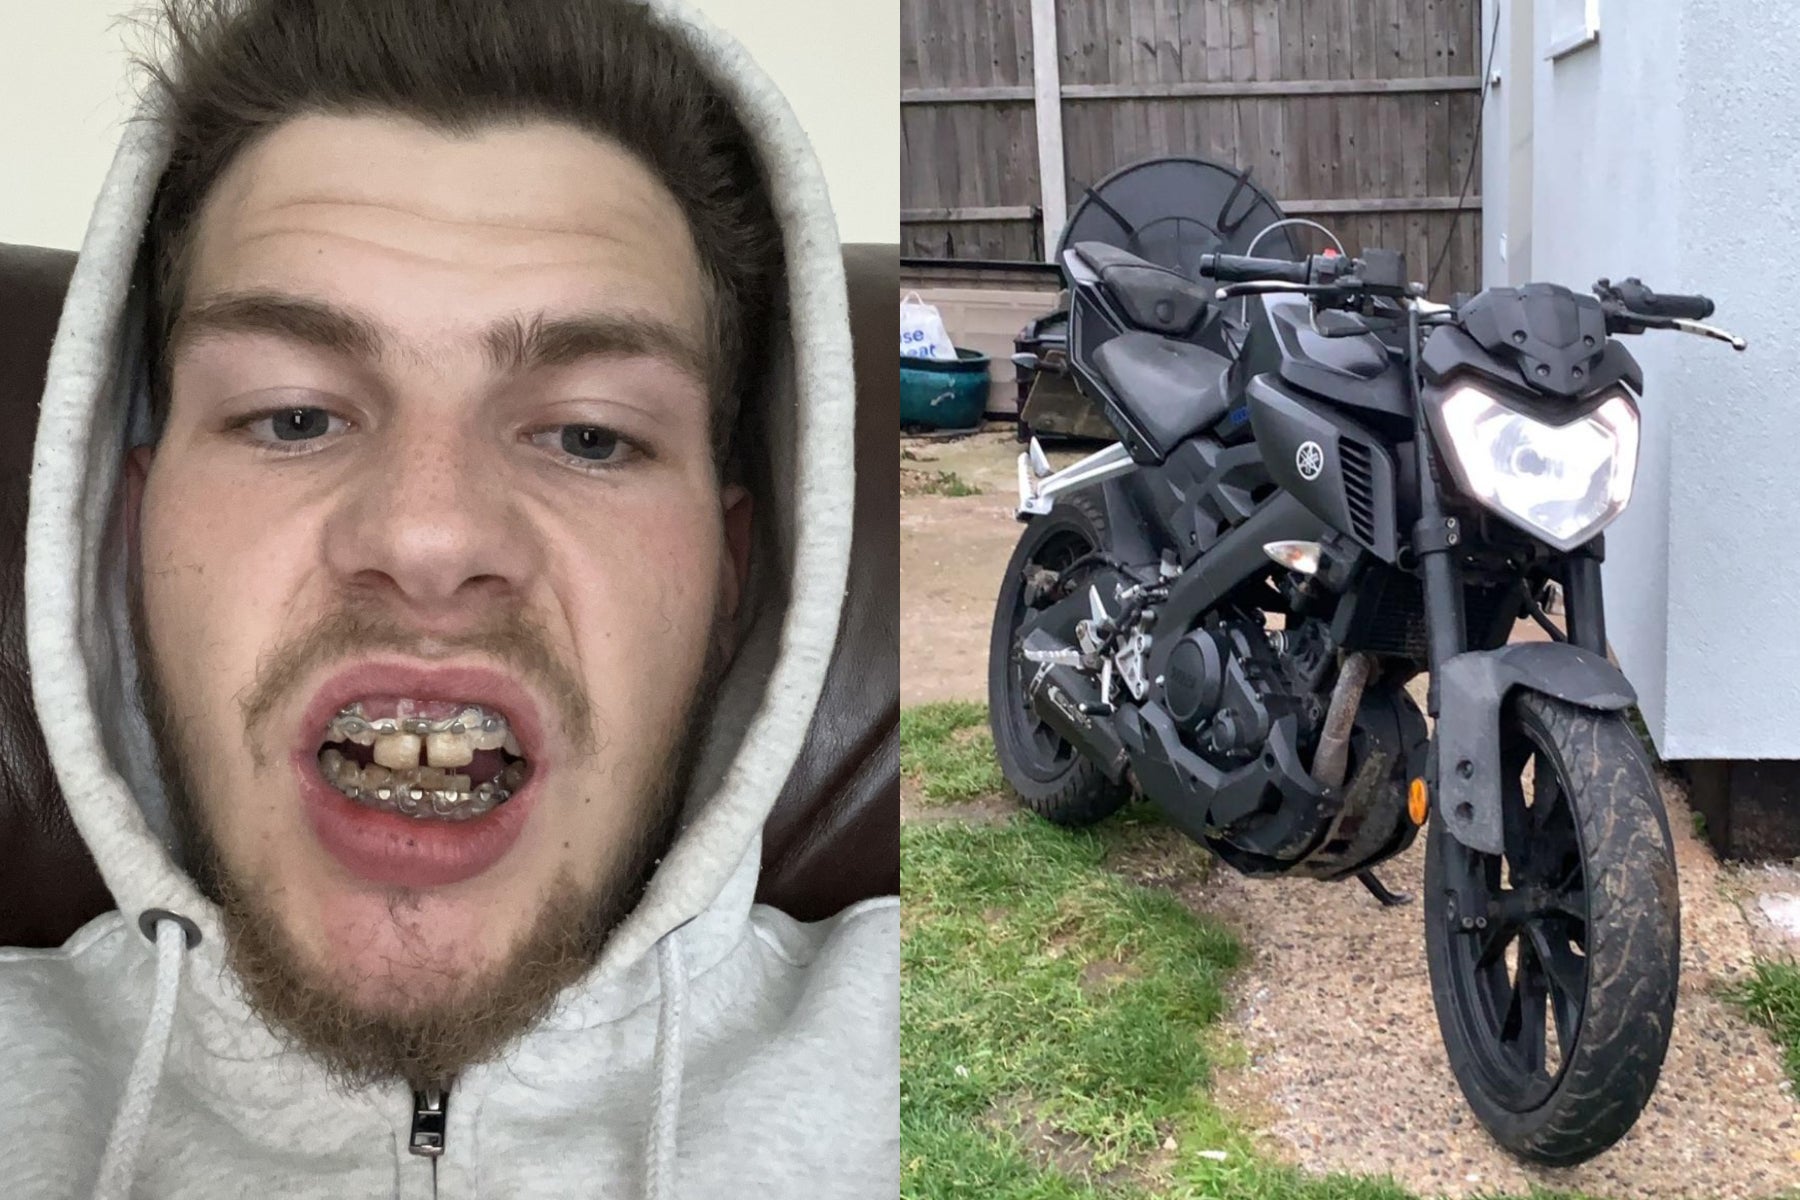 Callum Baldwin, 23, had his jaw wired shut to prevent his face from collapsing after being knocked off his motorbike